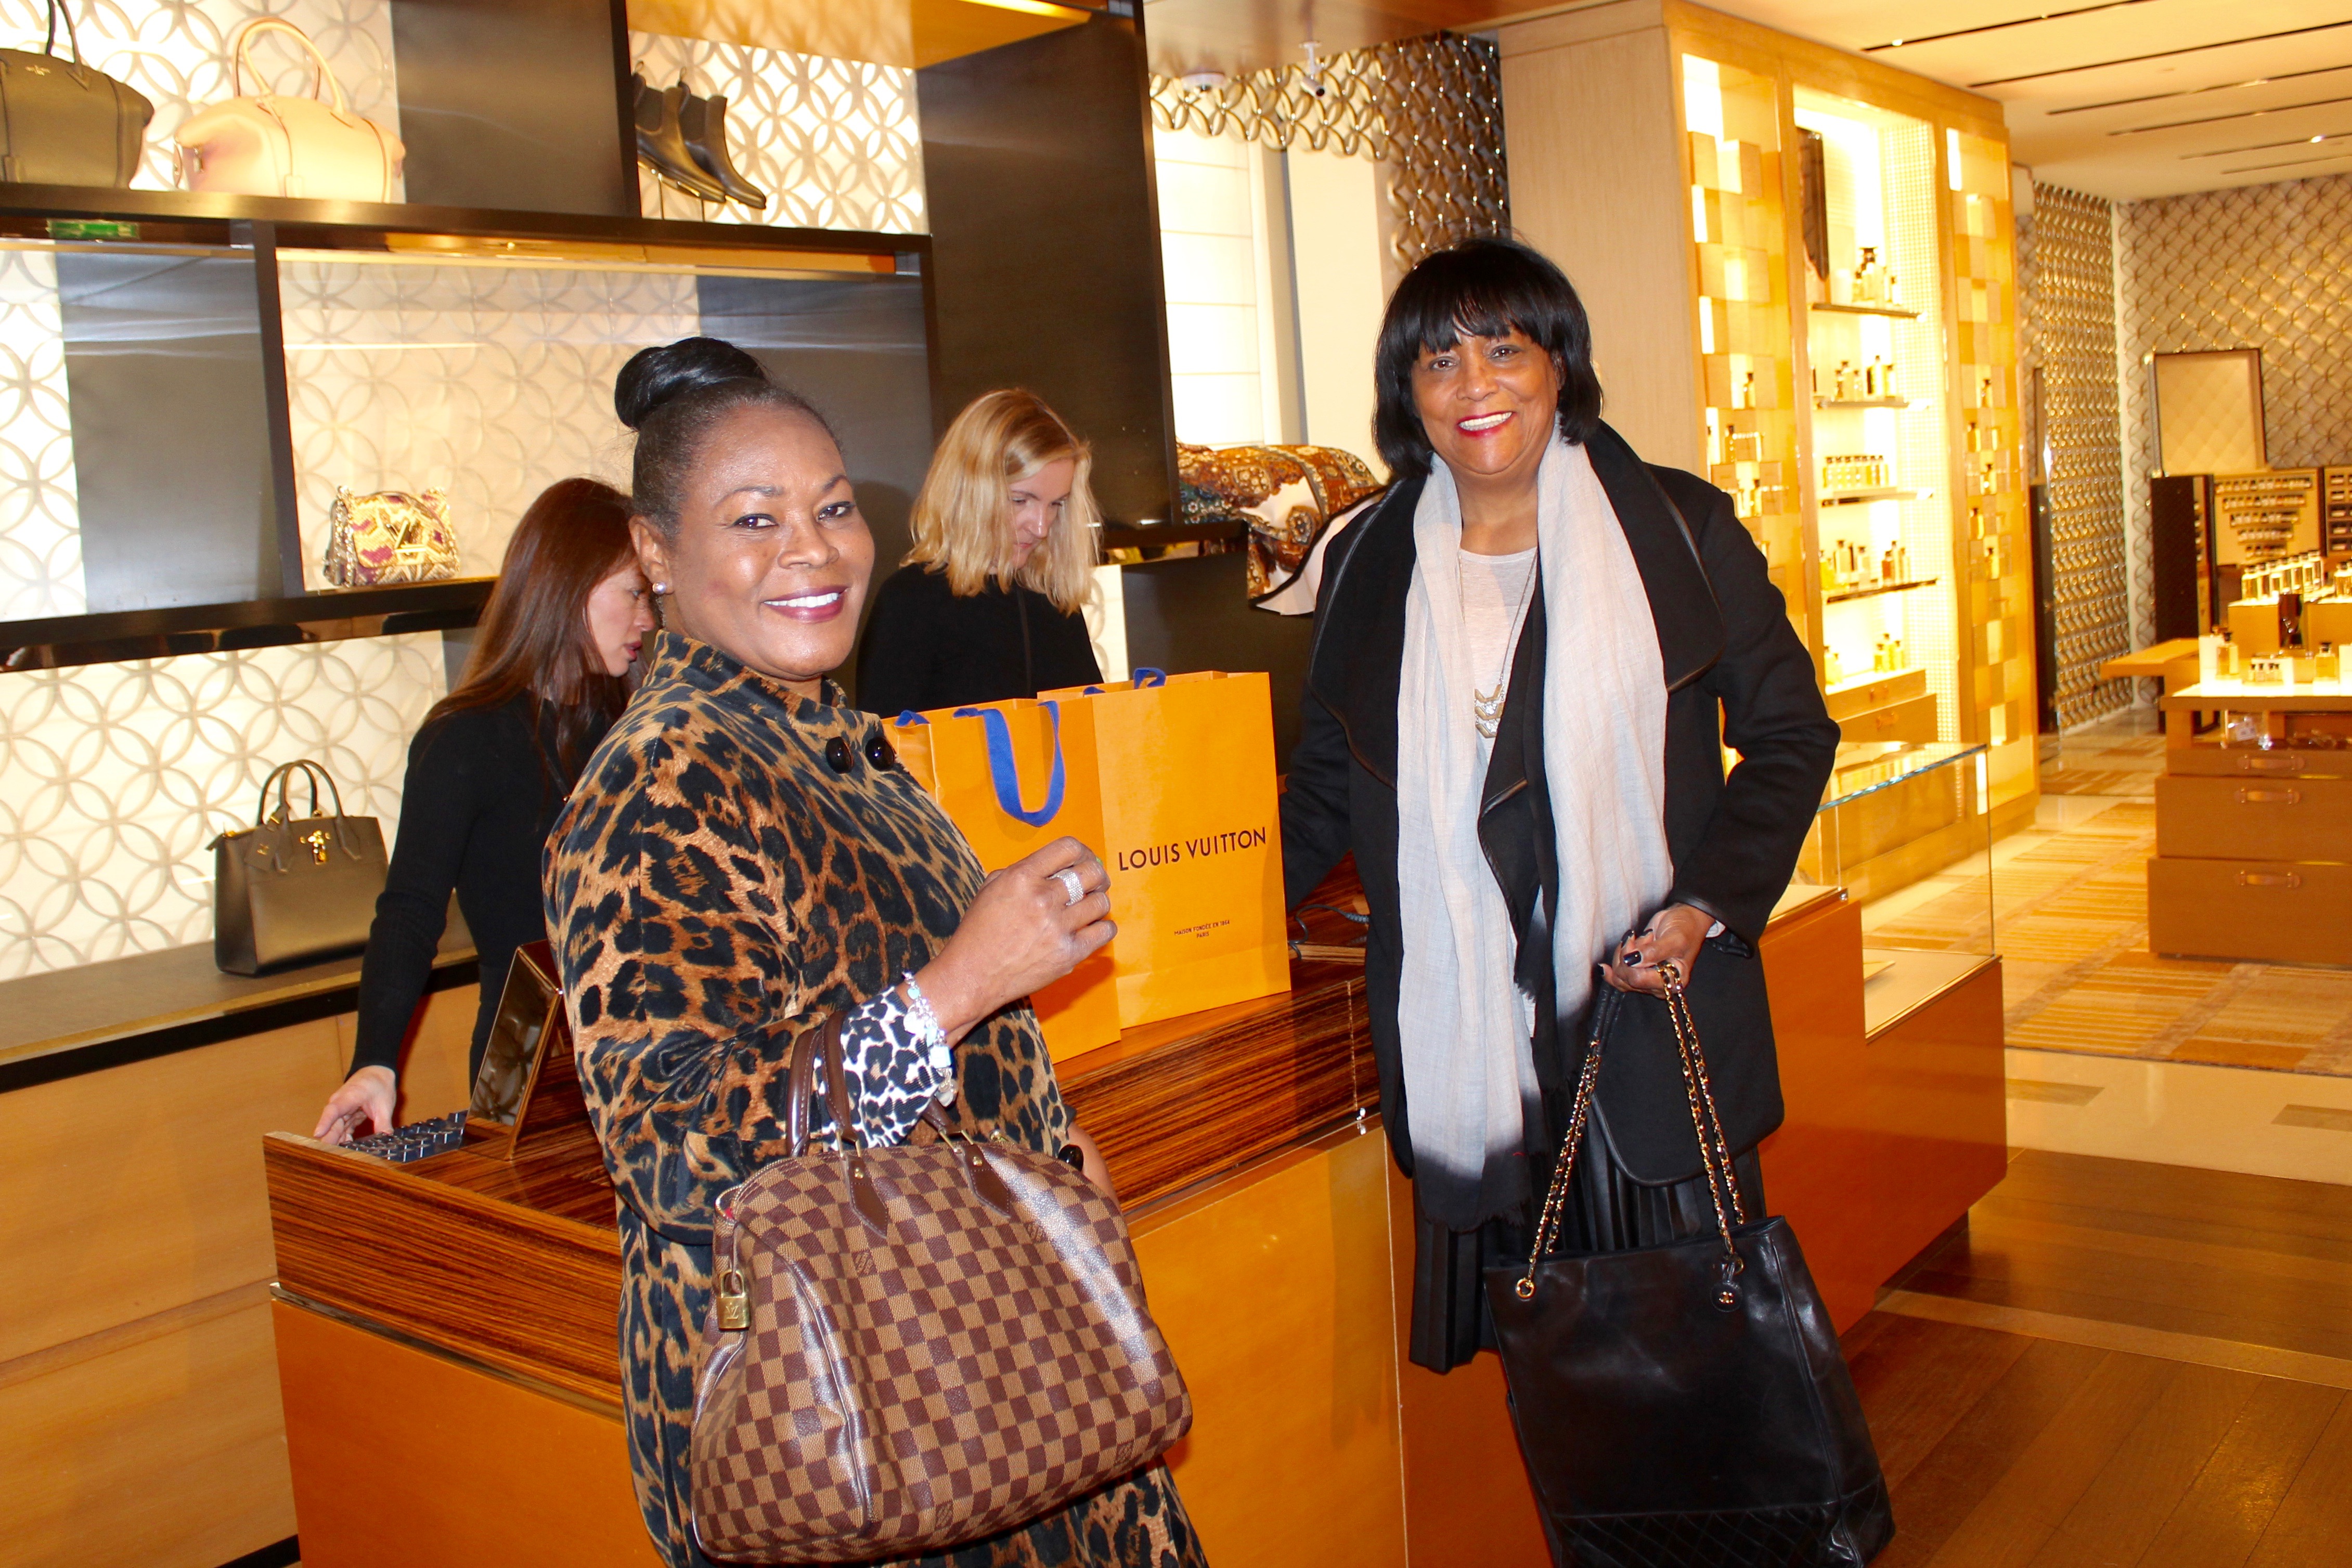 My Paris Trip, "'S Marvelous." Location: Louis Vuitton on the Champs Élysées in Paris, France. with BFF, Cynthia. Wearing: Vintage Talbot's leopard print velvet coat and my LV speedy.